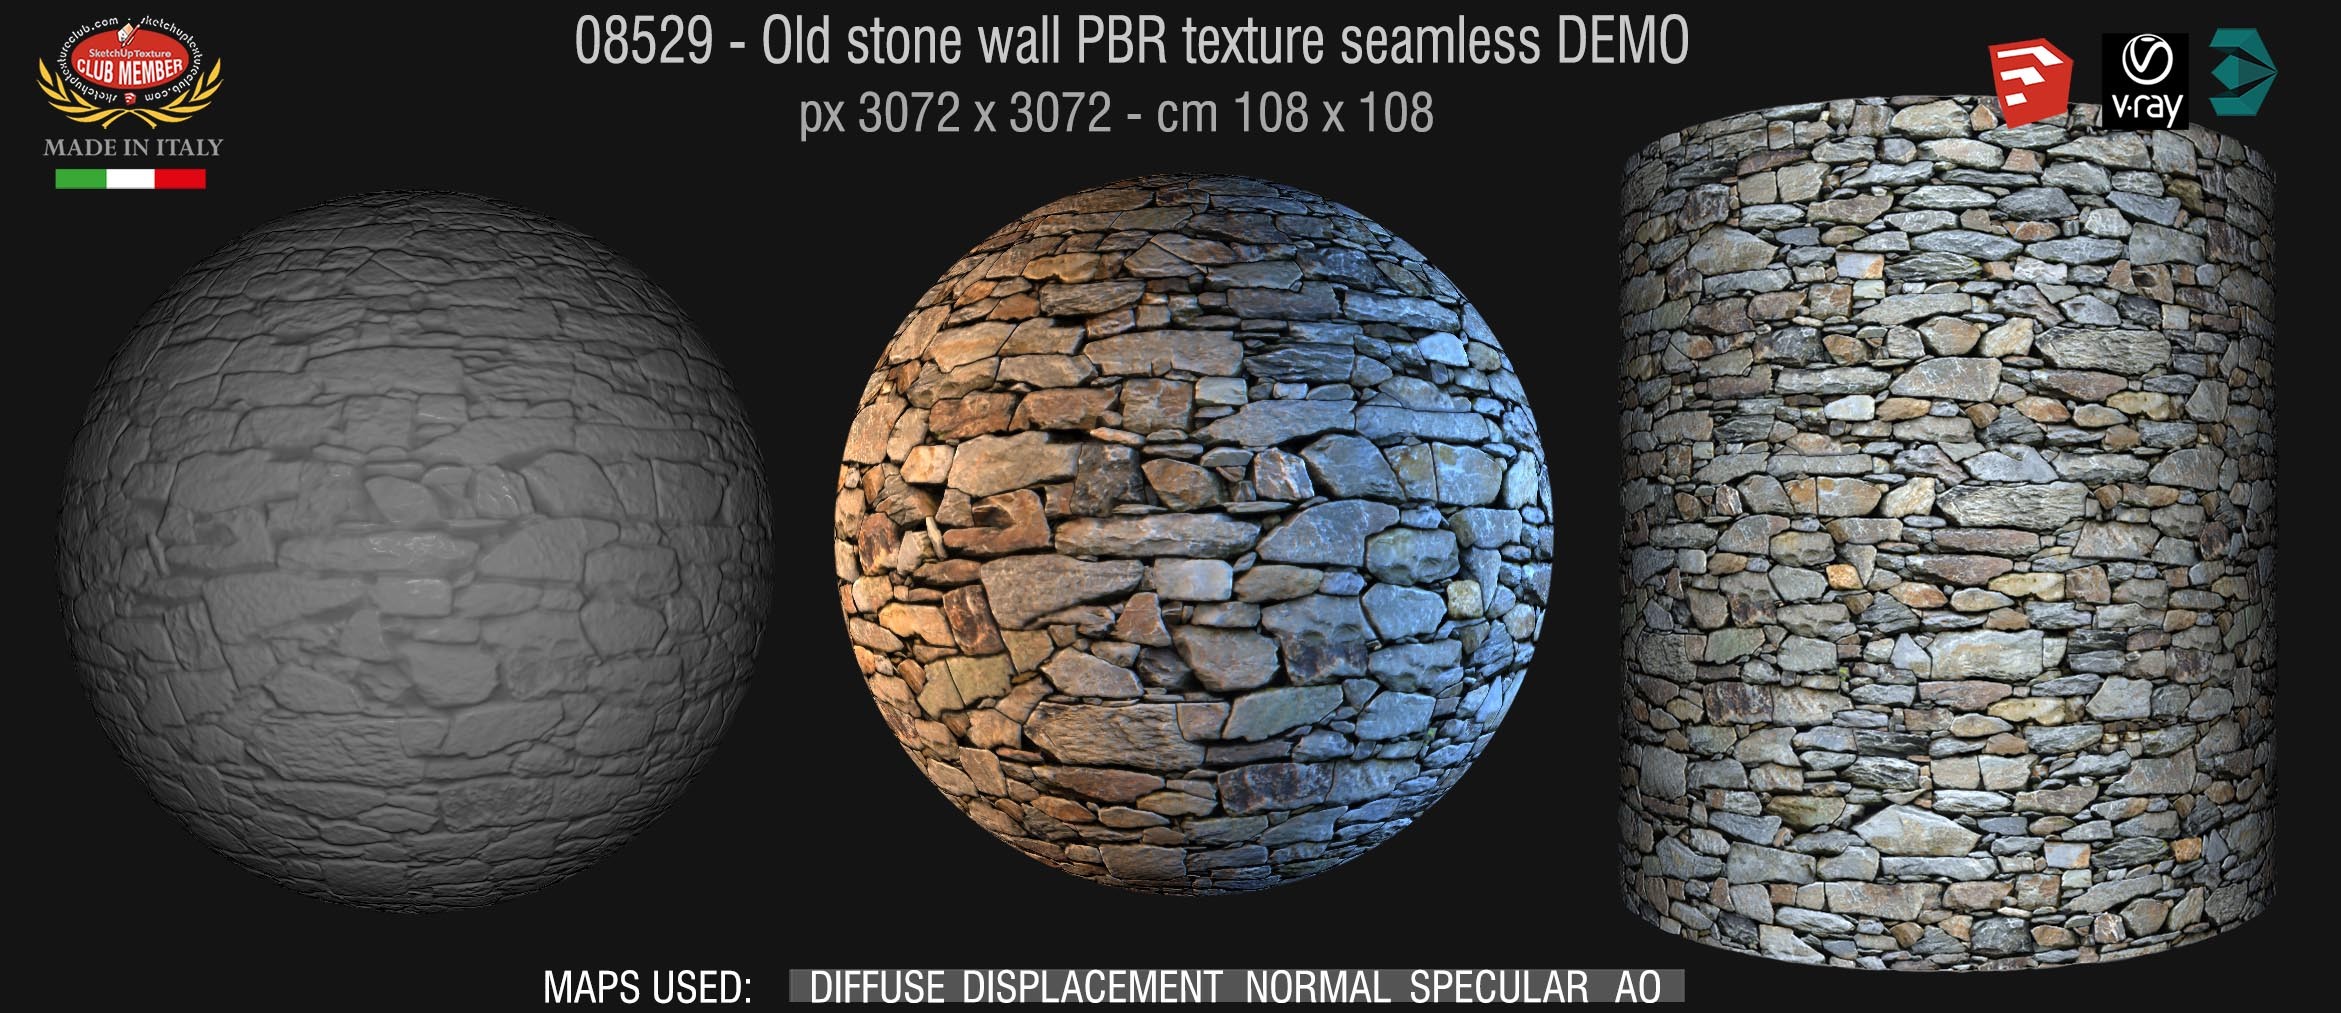 08529 Old stone wall PBR texture seamless DEMO